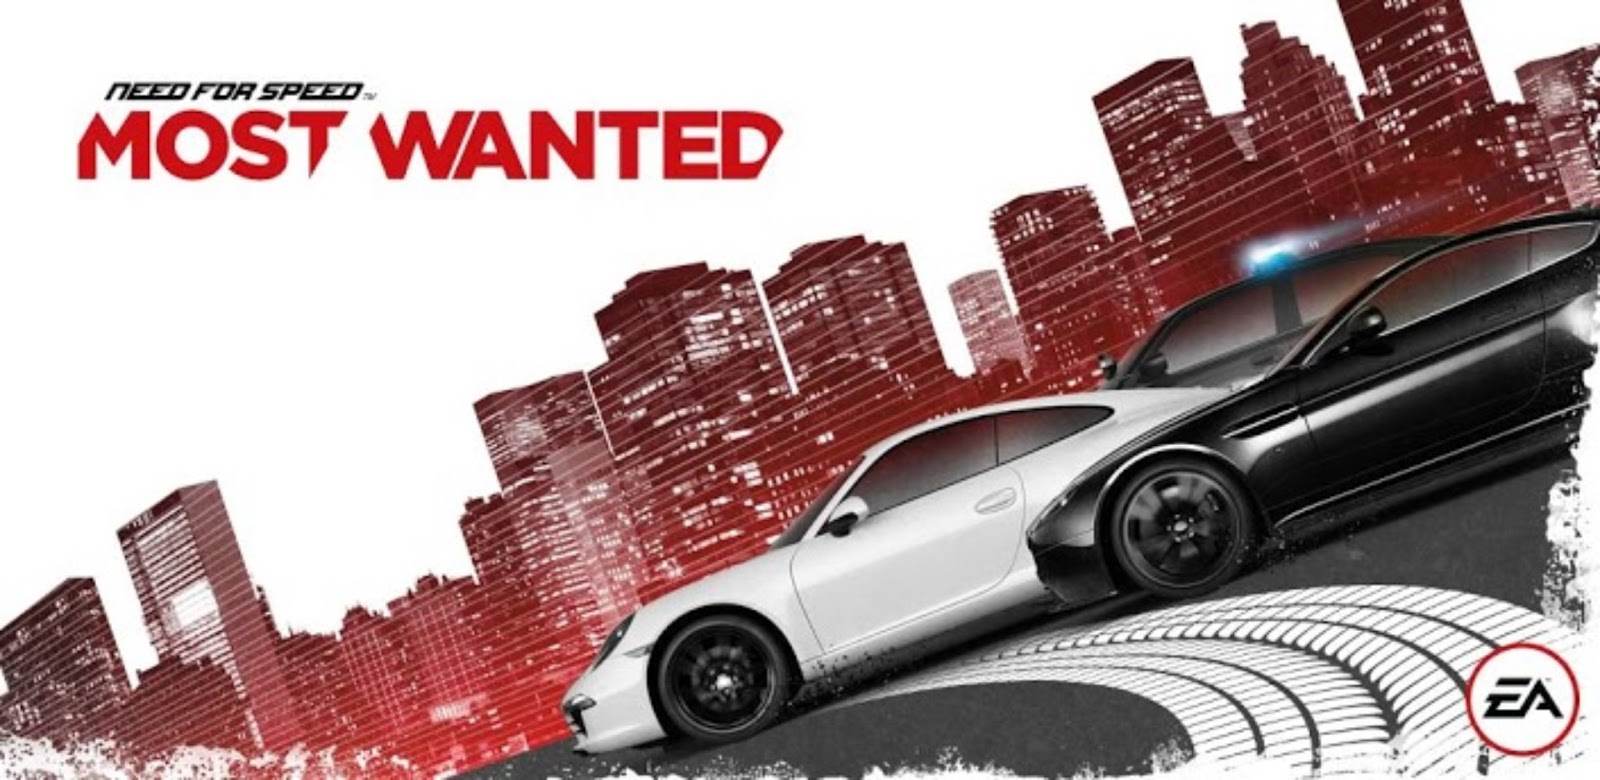 Need for Speed™ Most Wanted v1.3.71 Apk MEGA Mod Download